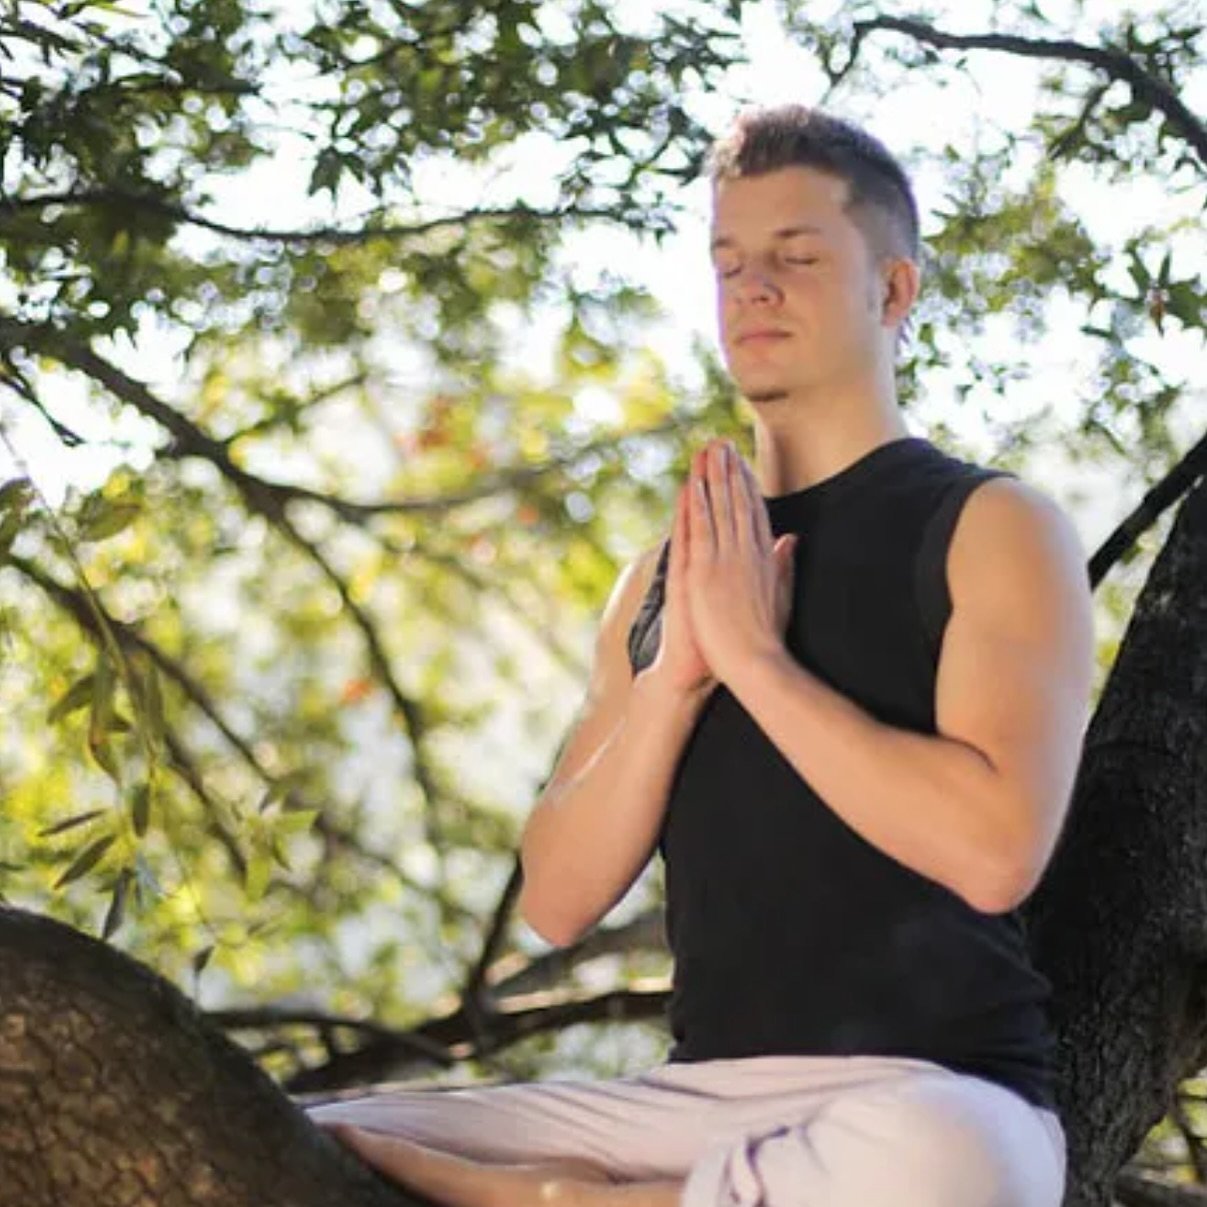 Join @zachbeachlove as he launches his new weekly, donation-based Dharma Talk and Meditation class, starting this Monday, April 15th. 📿🪬

Talks will include wisdom teachings, poetry and stories as we explore the spiritualities of yoga, Buddhism, Ve